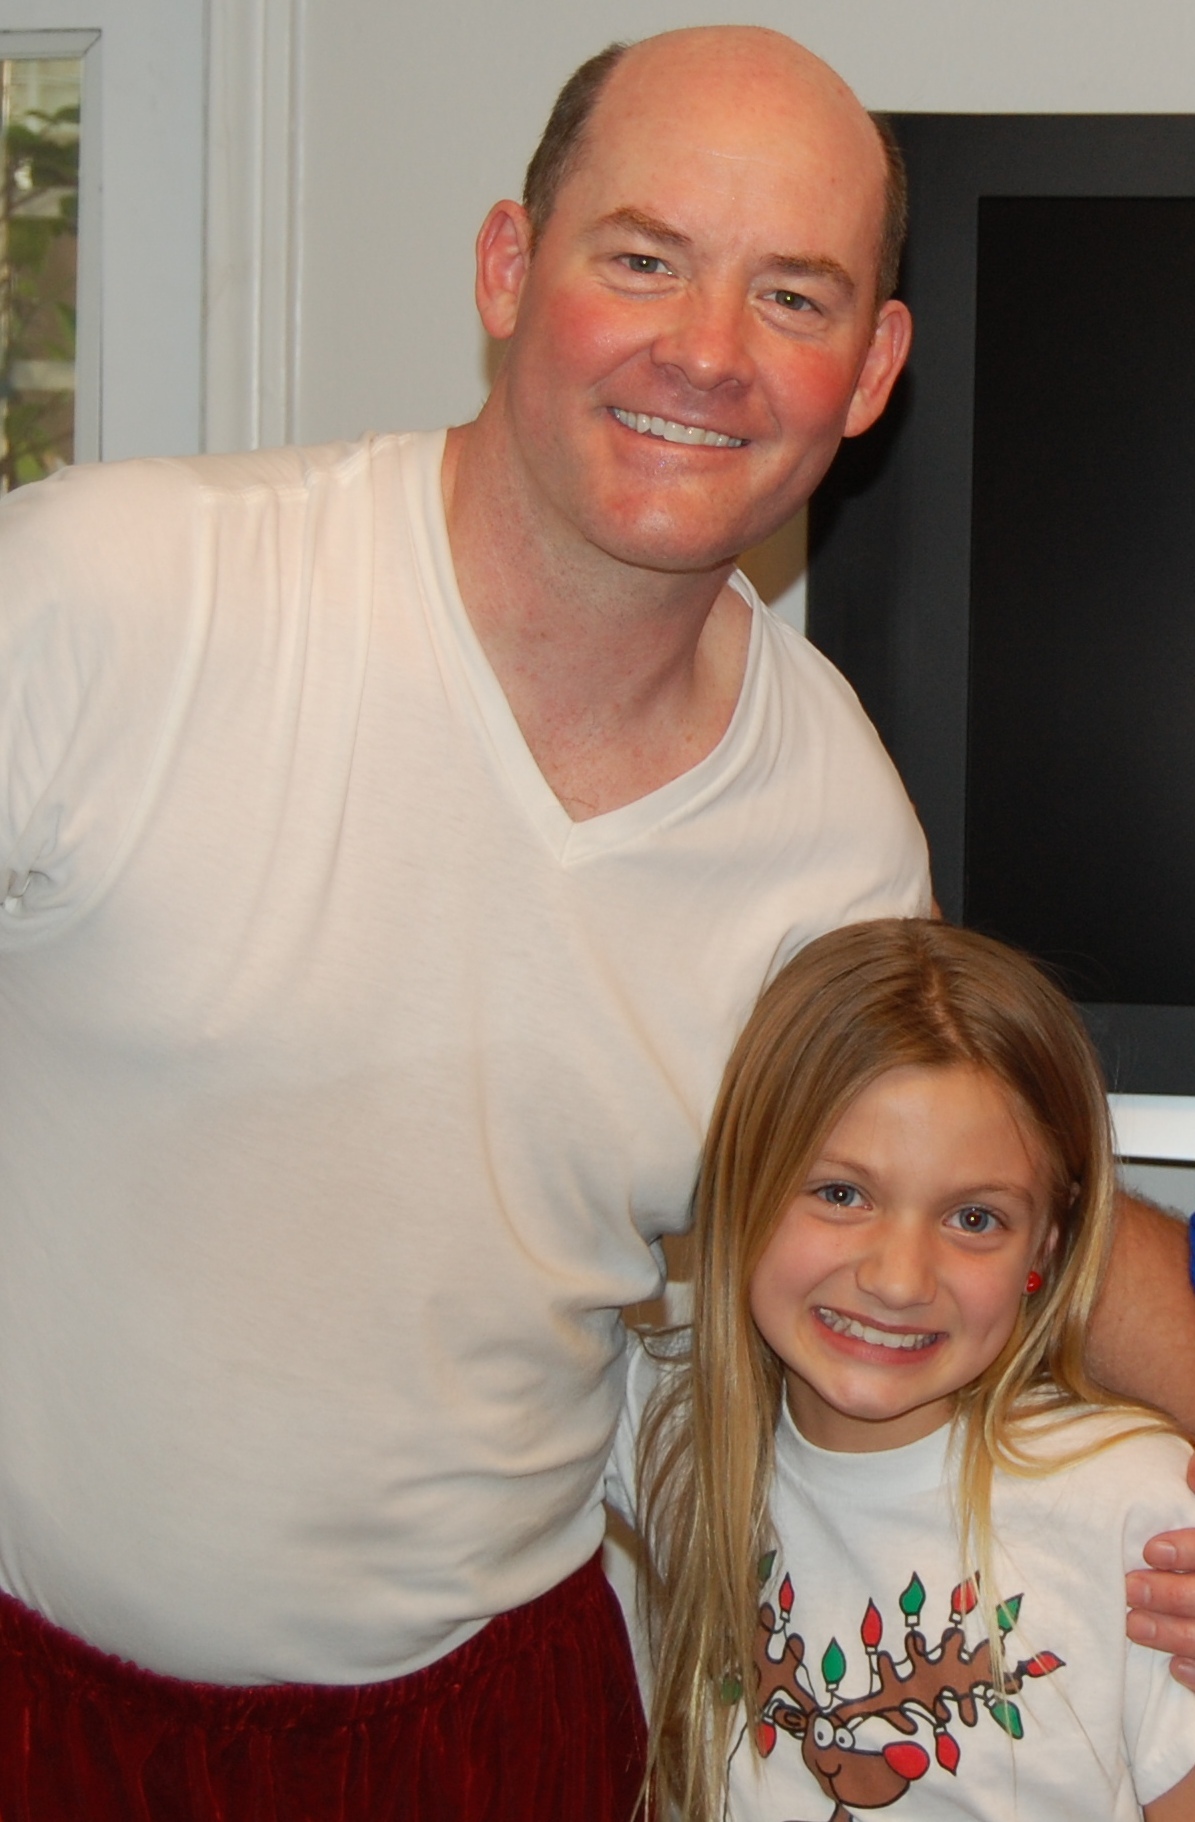 Laci with David Koechner behind the scenes!